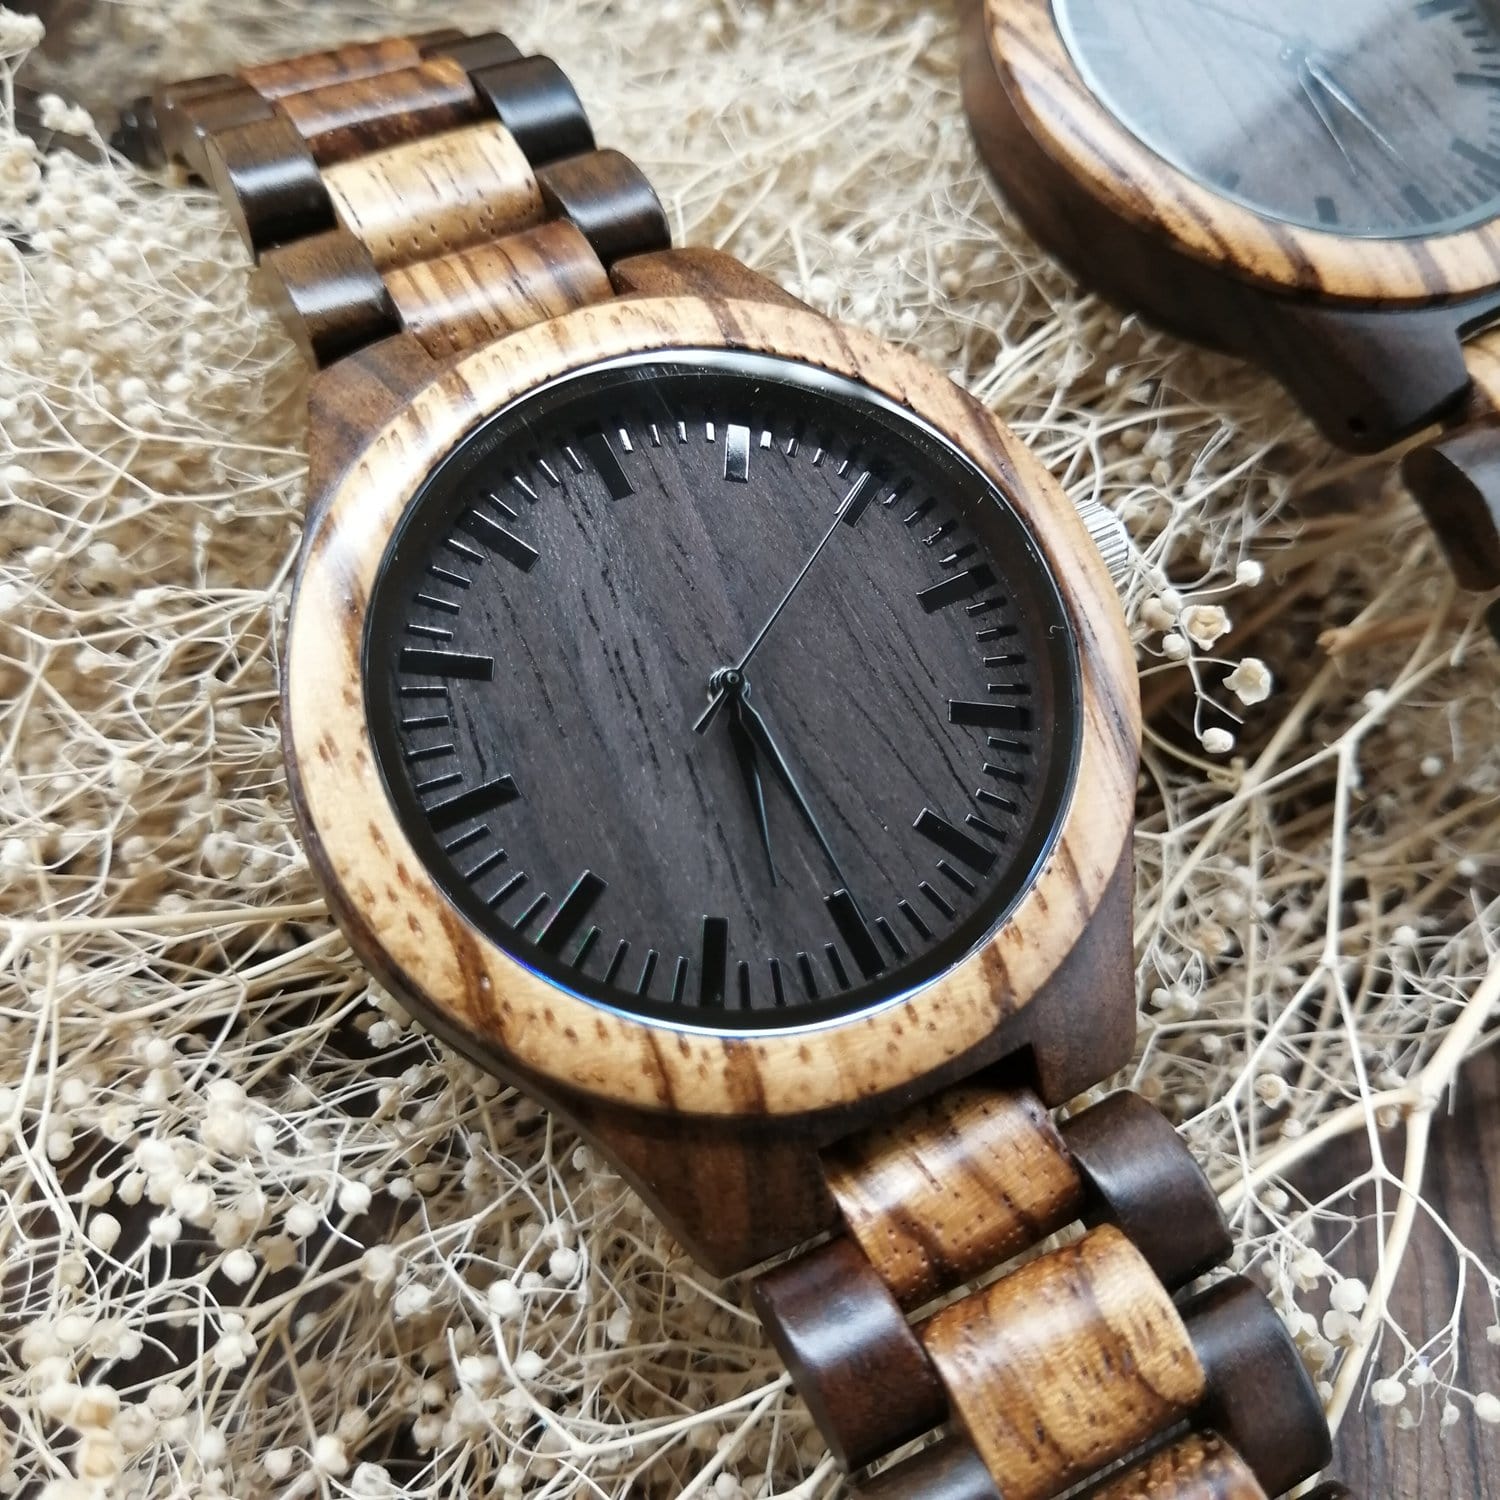 Watches To My Man - The Day I Met You Engraved Wood Watch GiveMe-Gifts